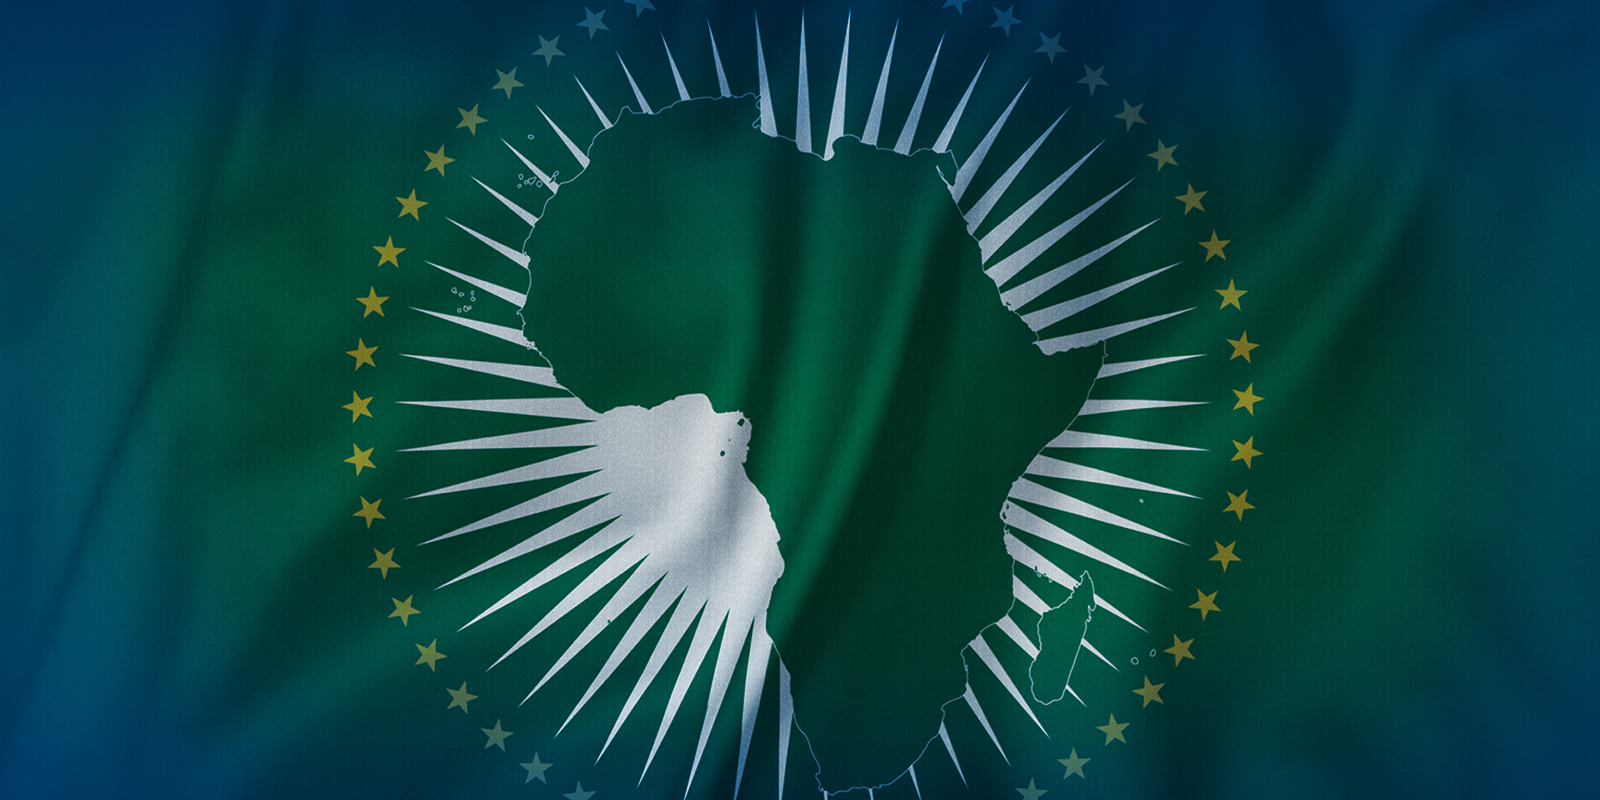 44 African Countries Sign Agreement to Establish African Continental Free Trade Area